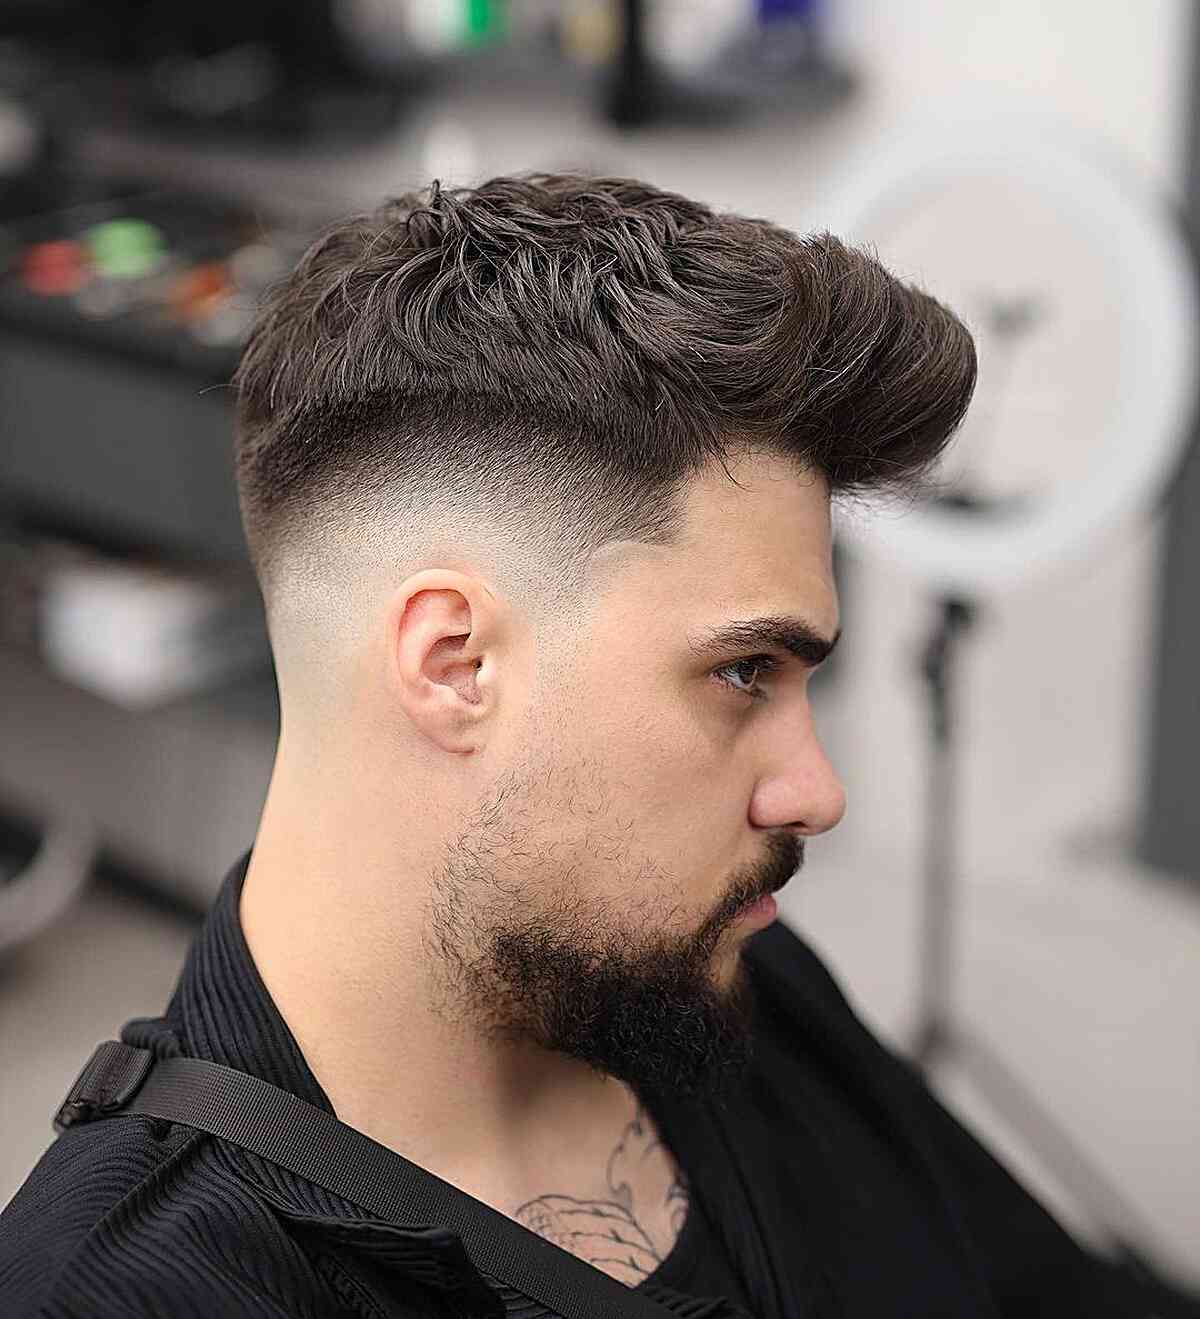 Bald Fade with a Long Pomp-Style Top for Guys with thick hair